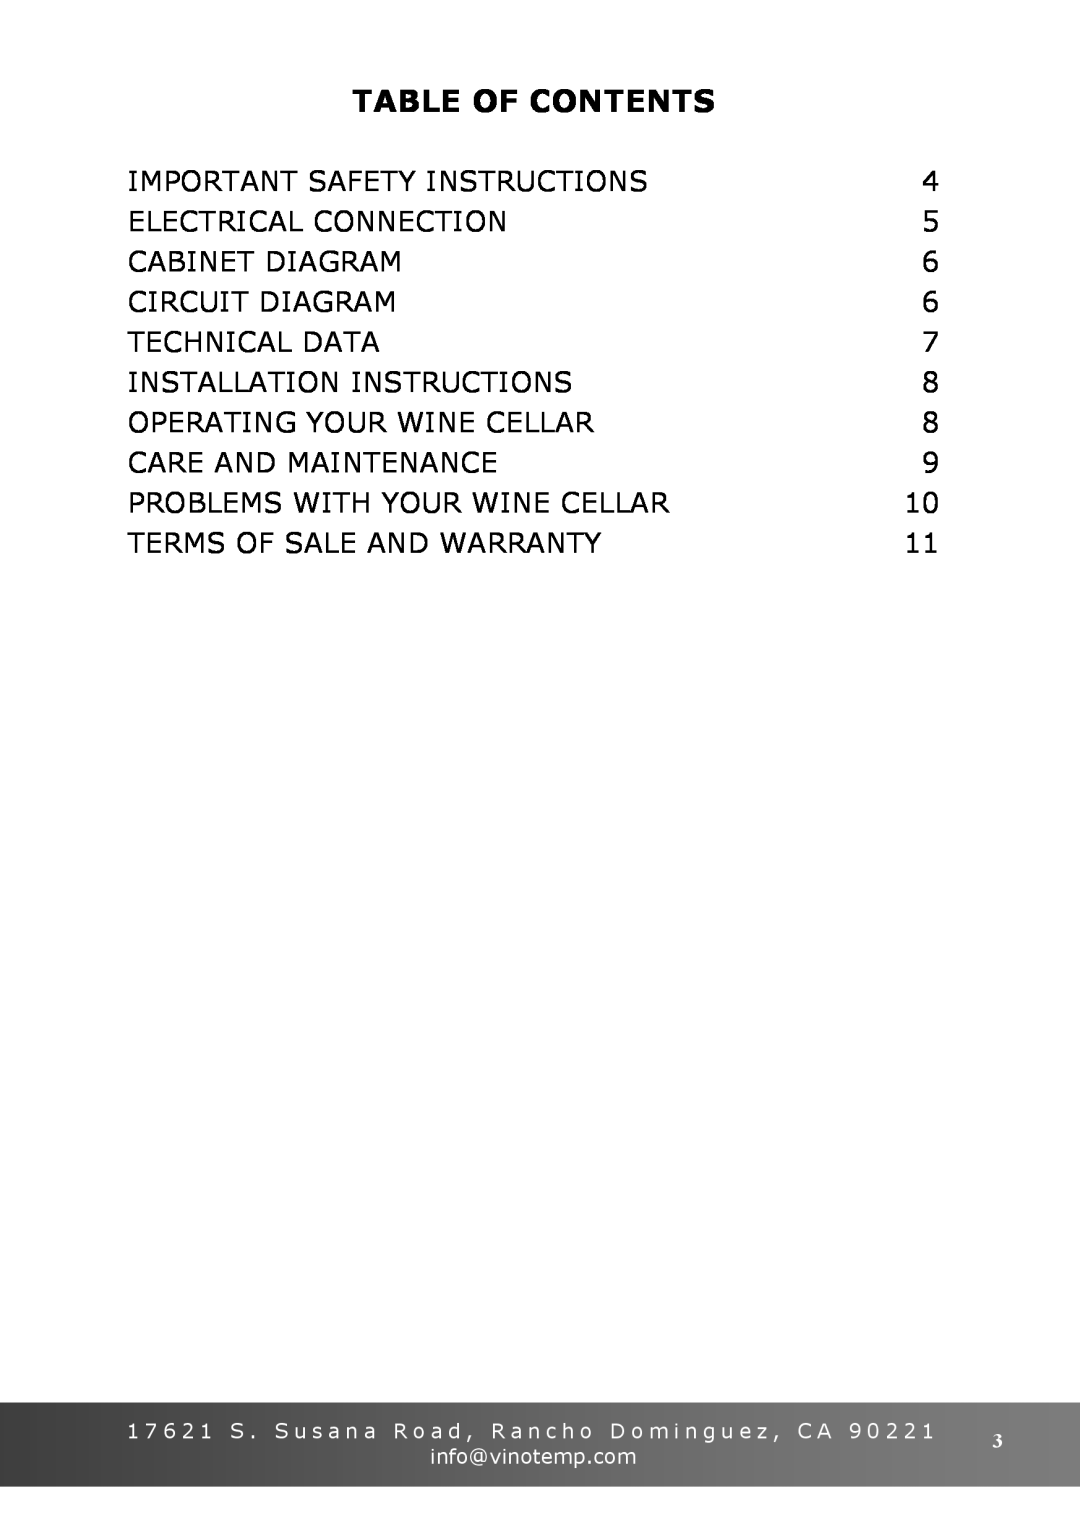 Vinotemp VT-15 TS owner manual Table Of Contents 